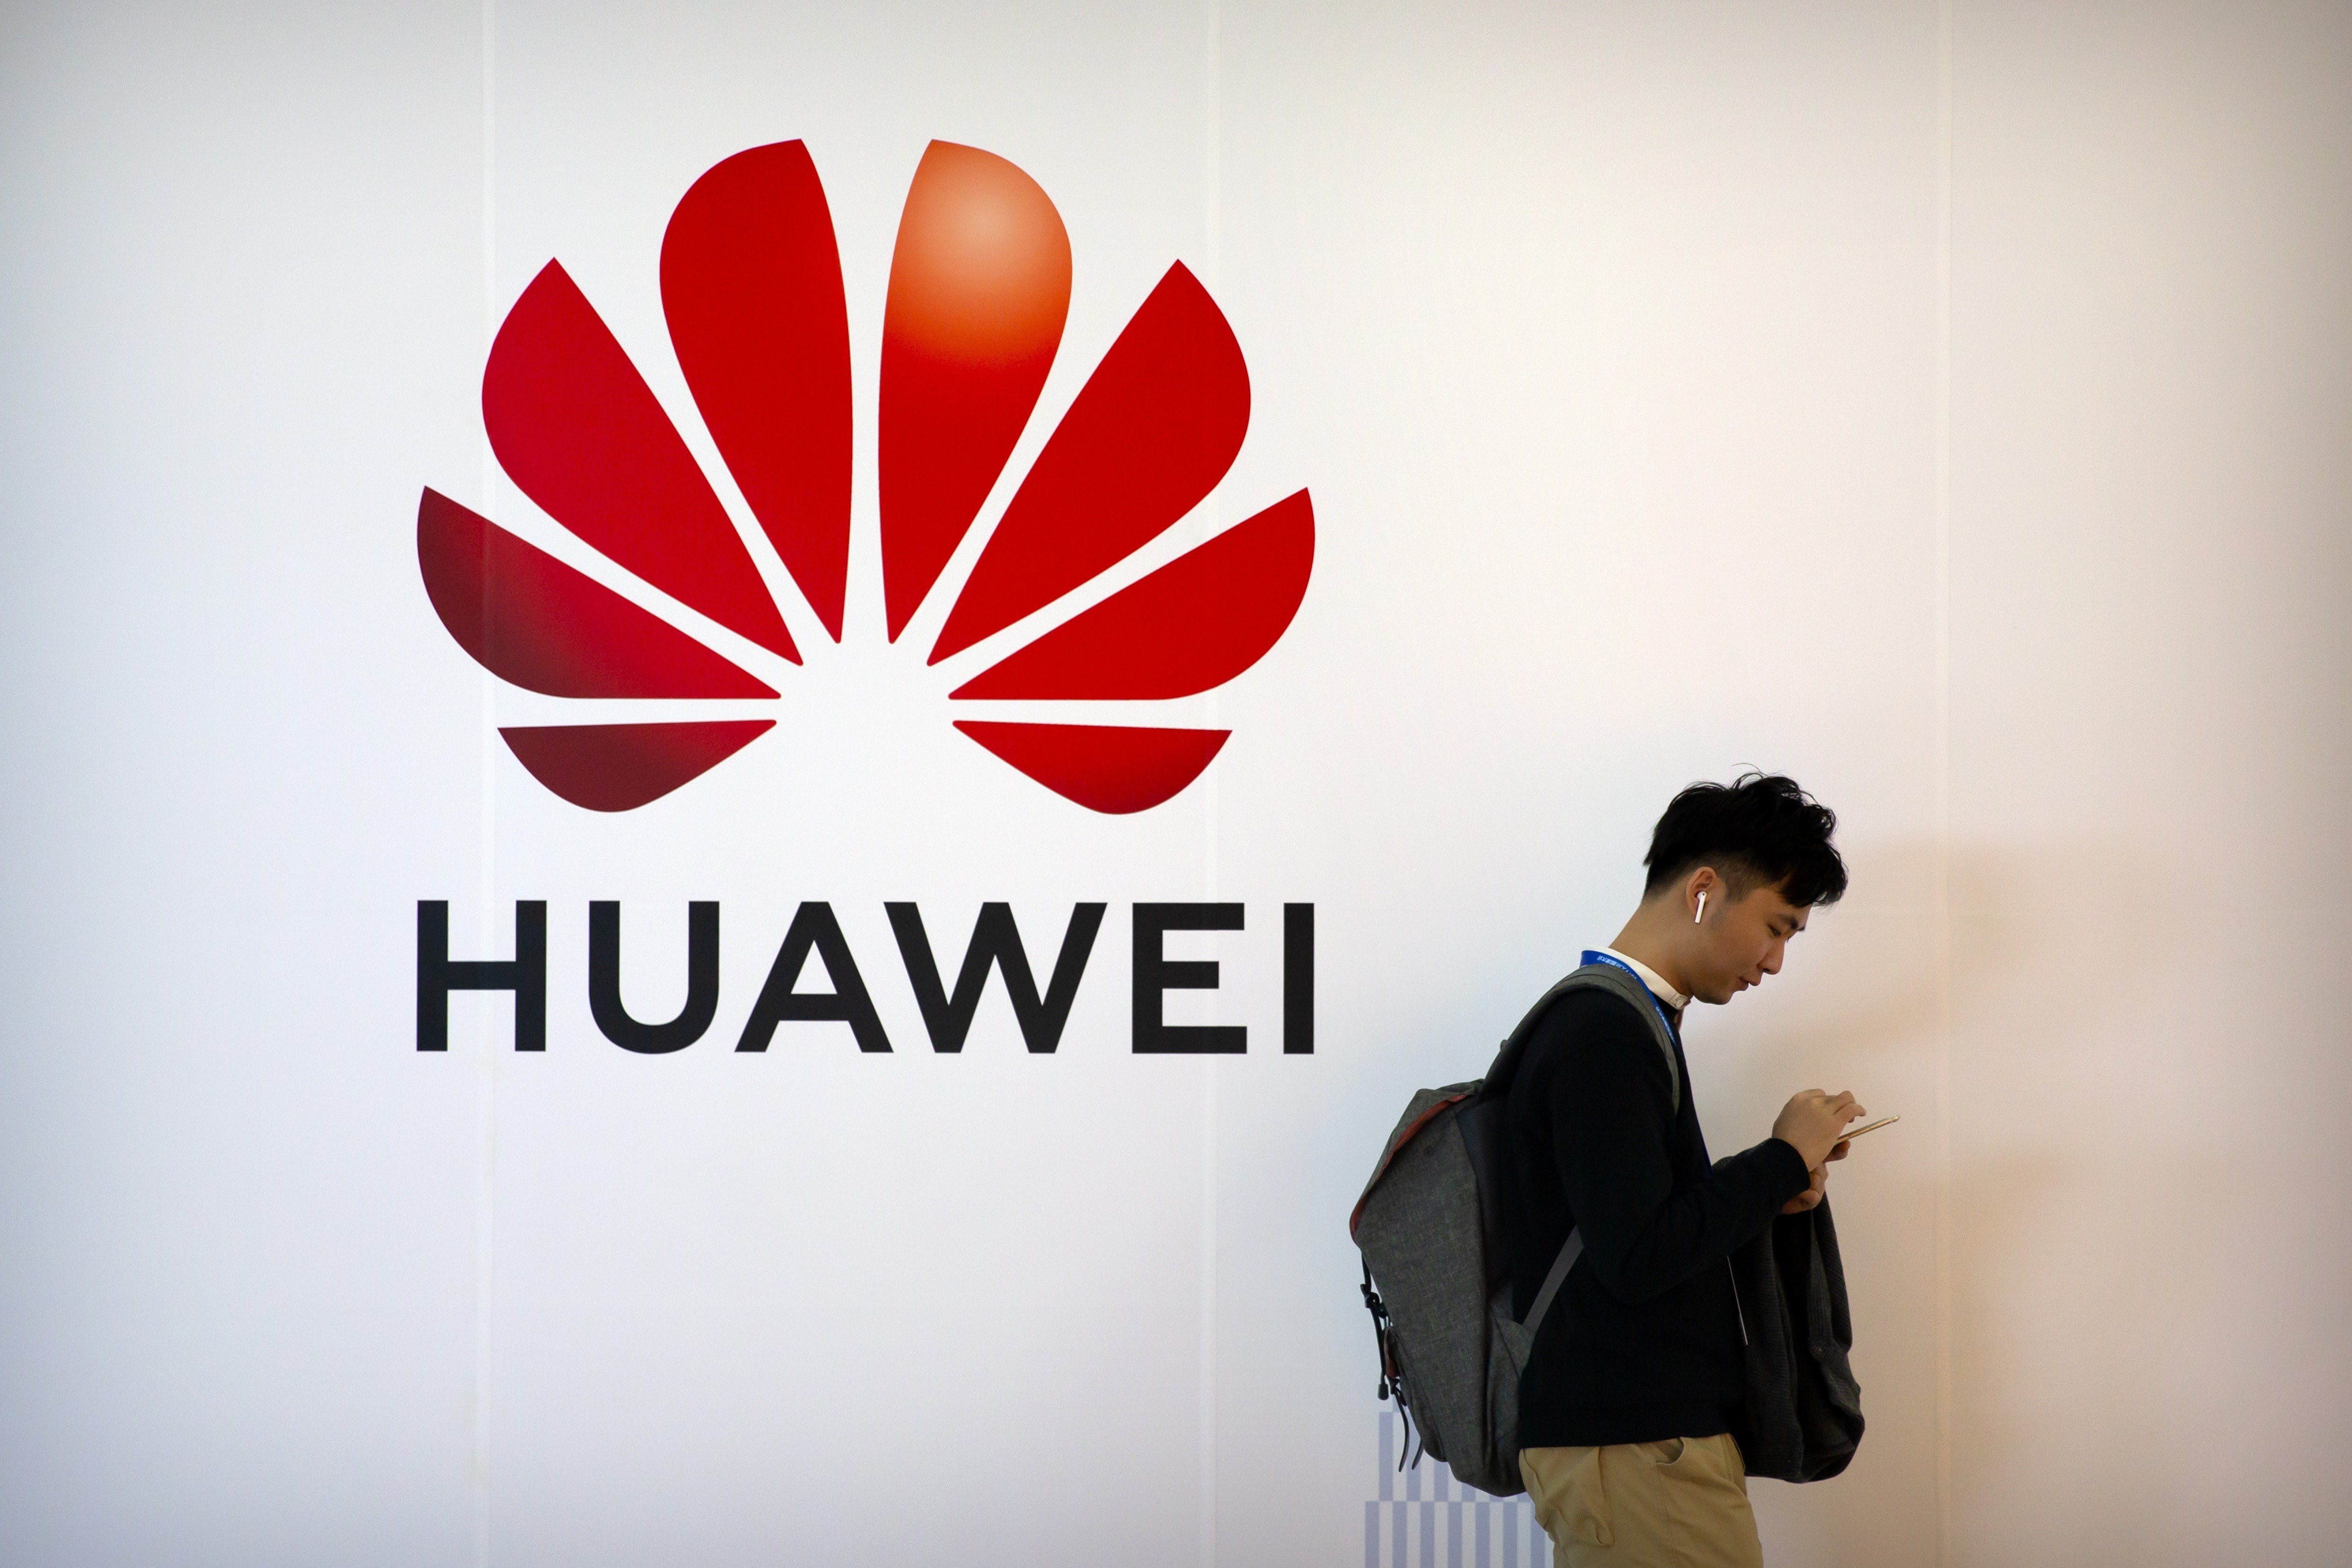 A man uses his smartphone as he stands near a billboard for Chinese technology firm Huawei at the PT Expo in Beijing, Thursday, Oct. 31, 2019. Photo: AP.